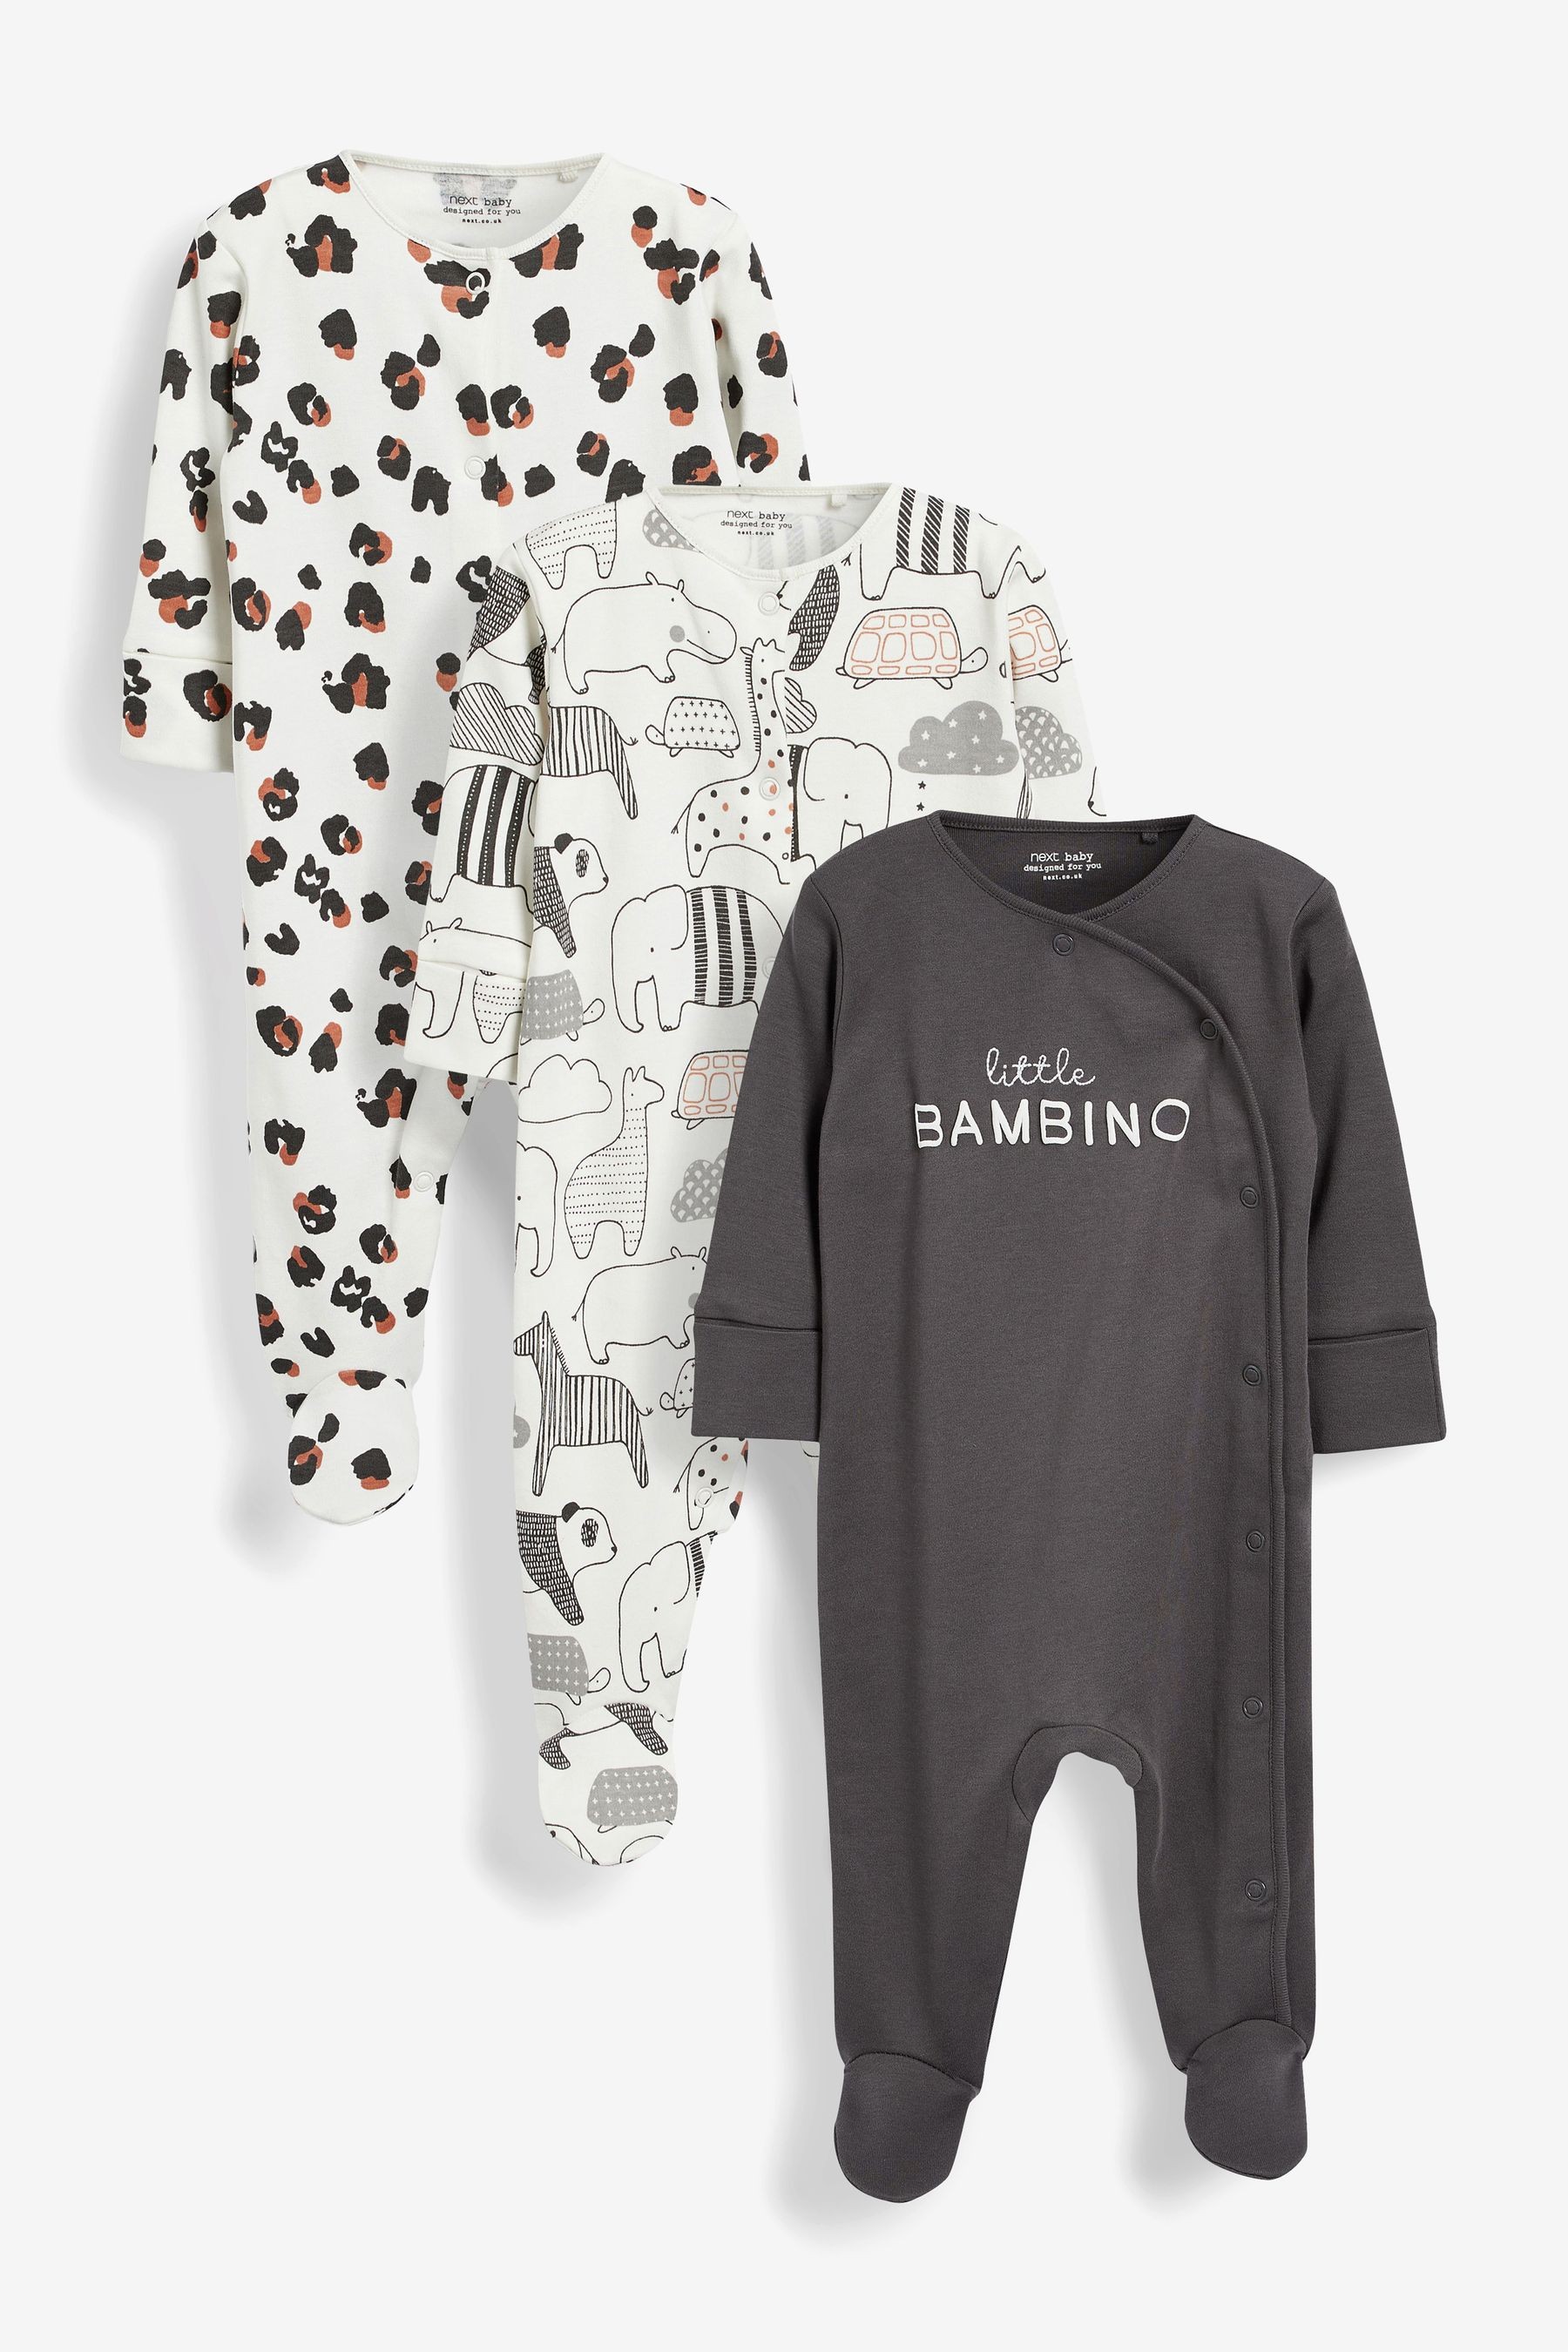 3 Pack Baby Sleepsuits (0mths-2yrs)